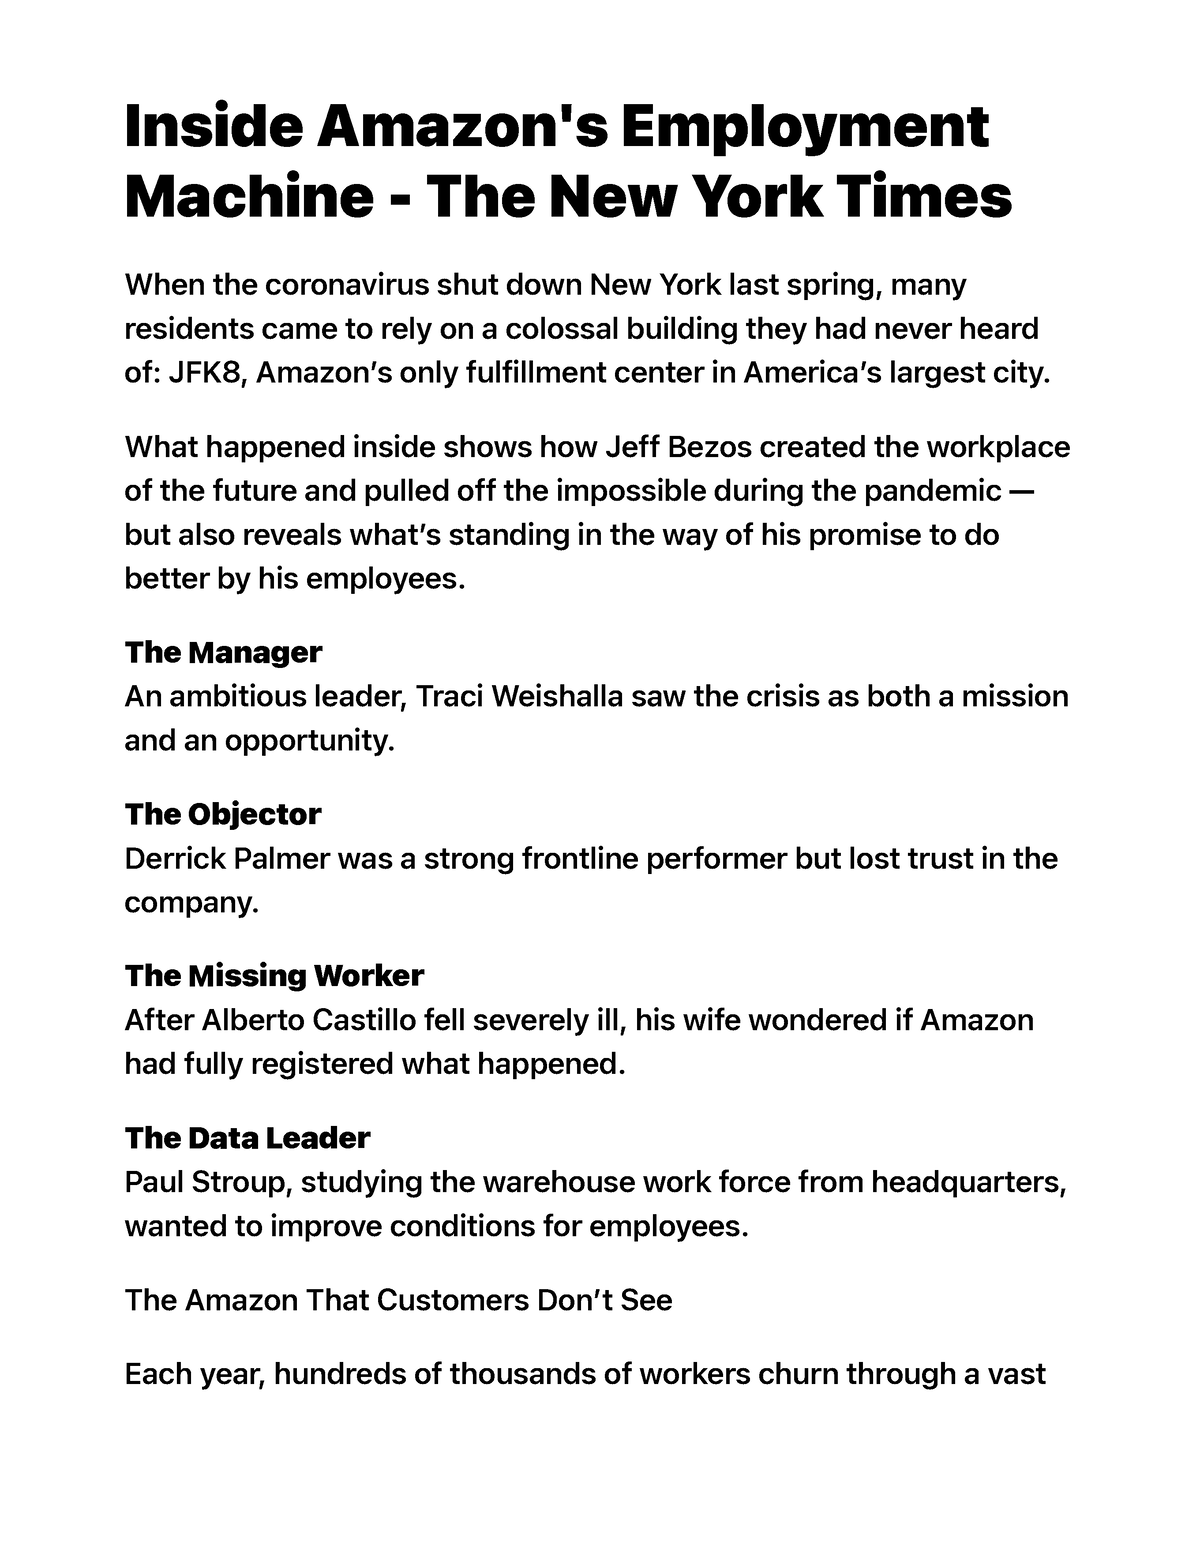 Inside 's Employment Machine - The New York Times